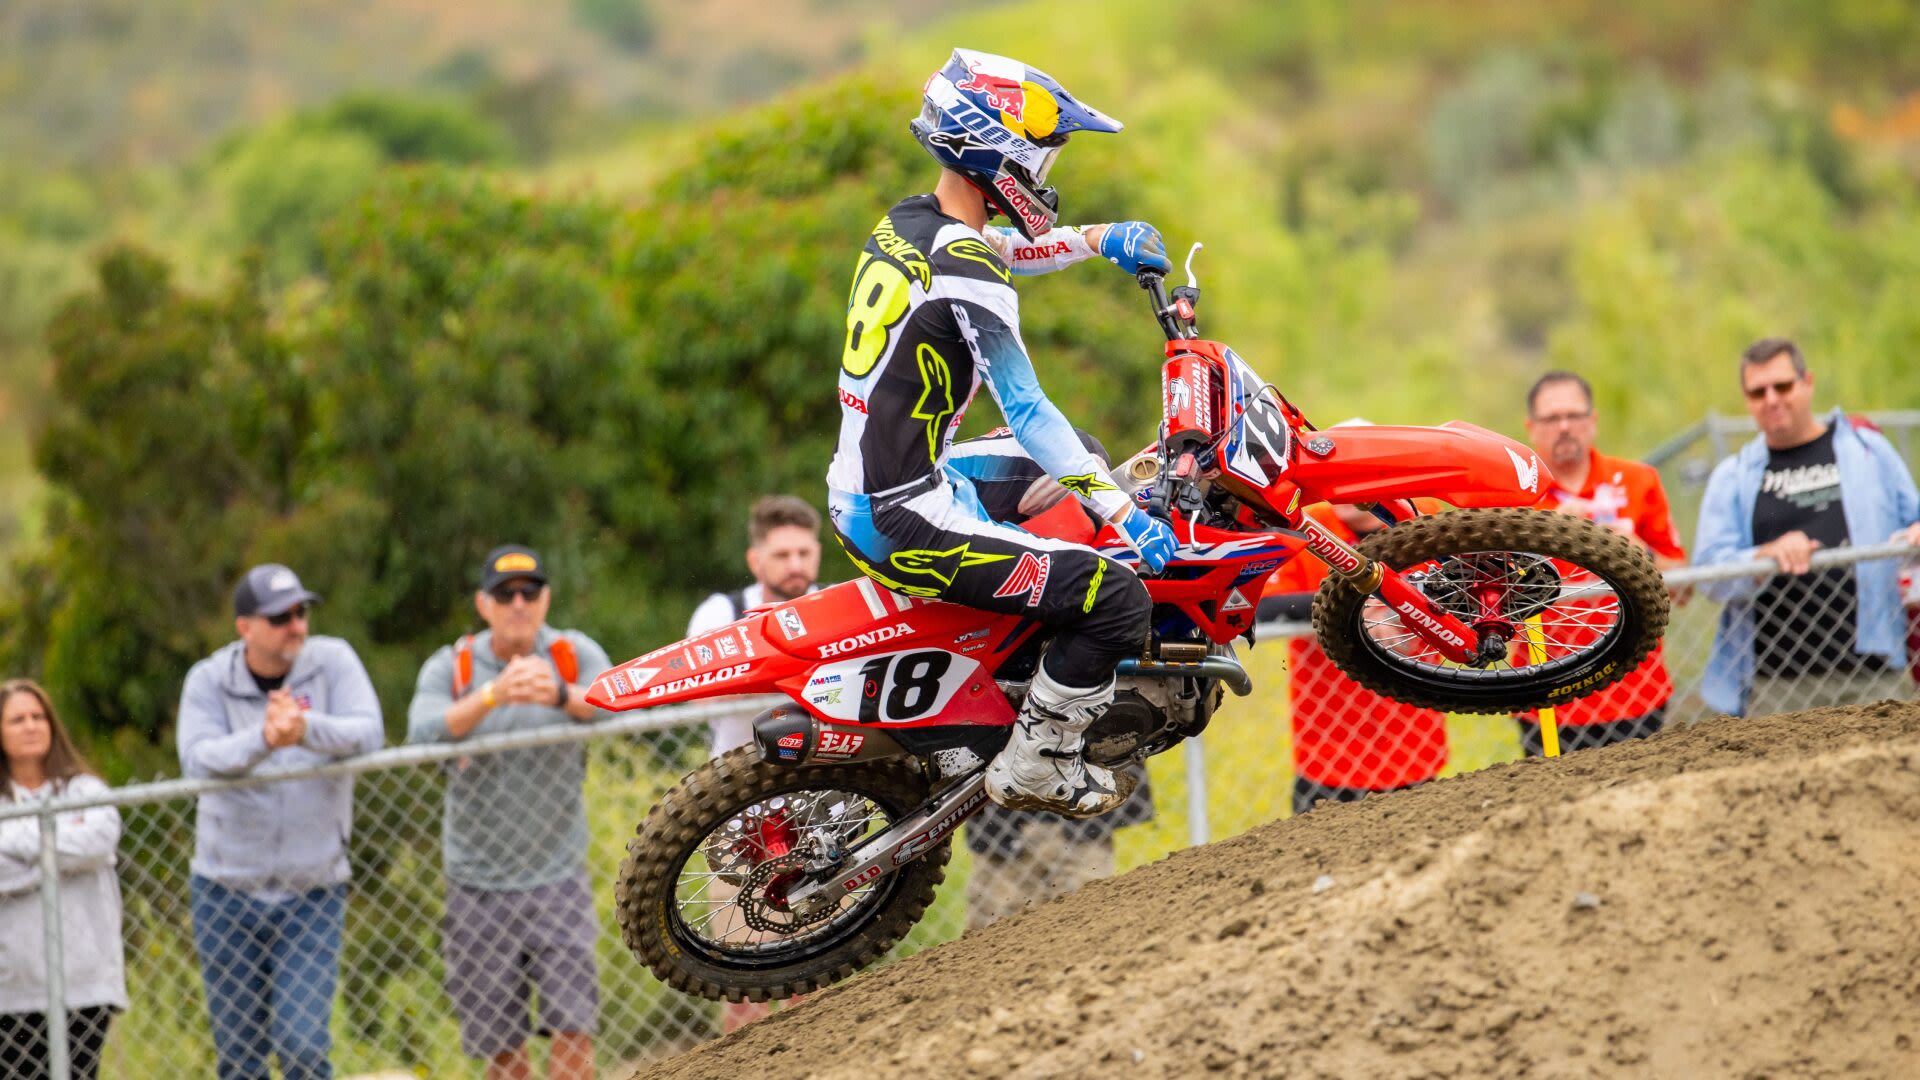 LIVE: Pro Motocross Round 1 coverage from Fox Raceway: Jett Lawrence wins 23rd consecutive moto